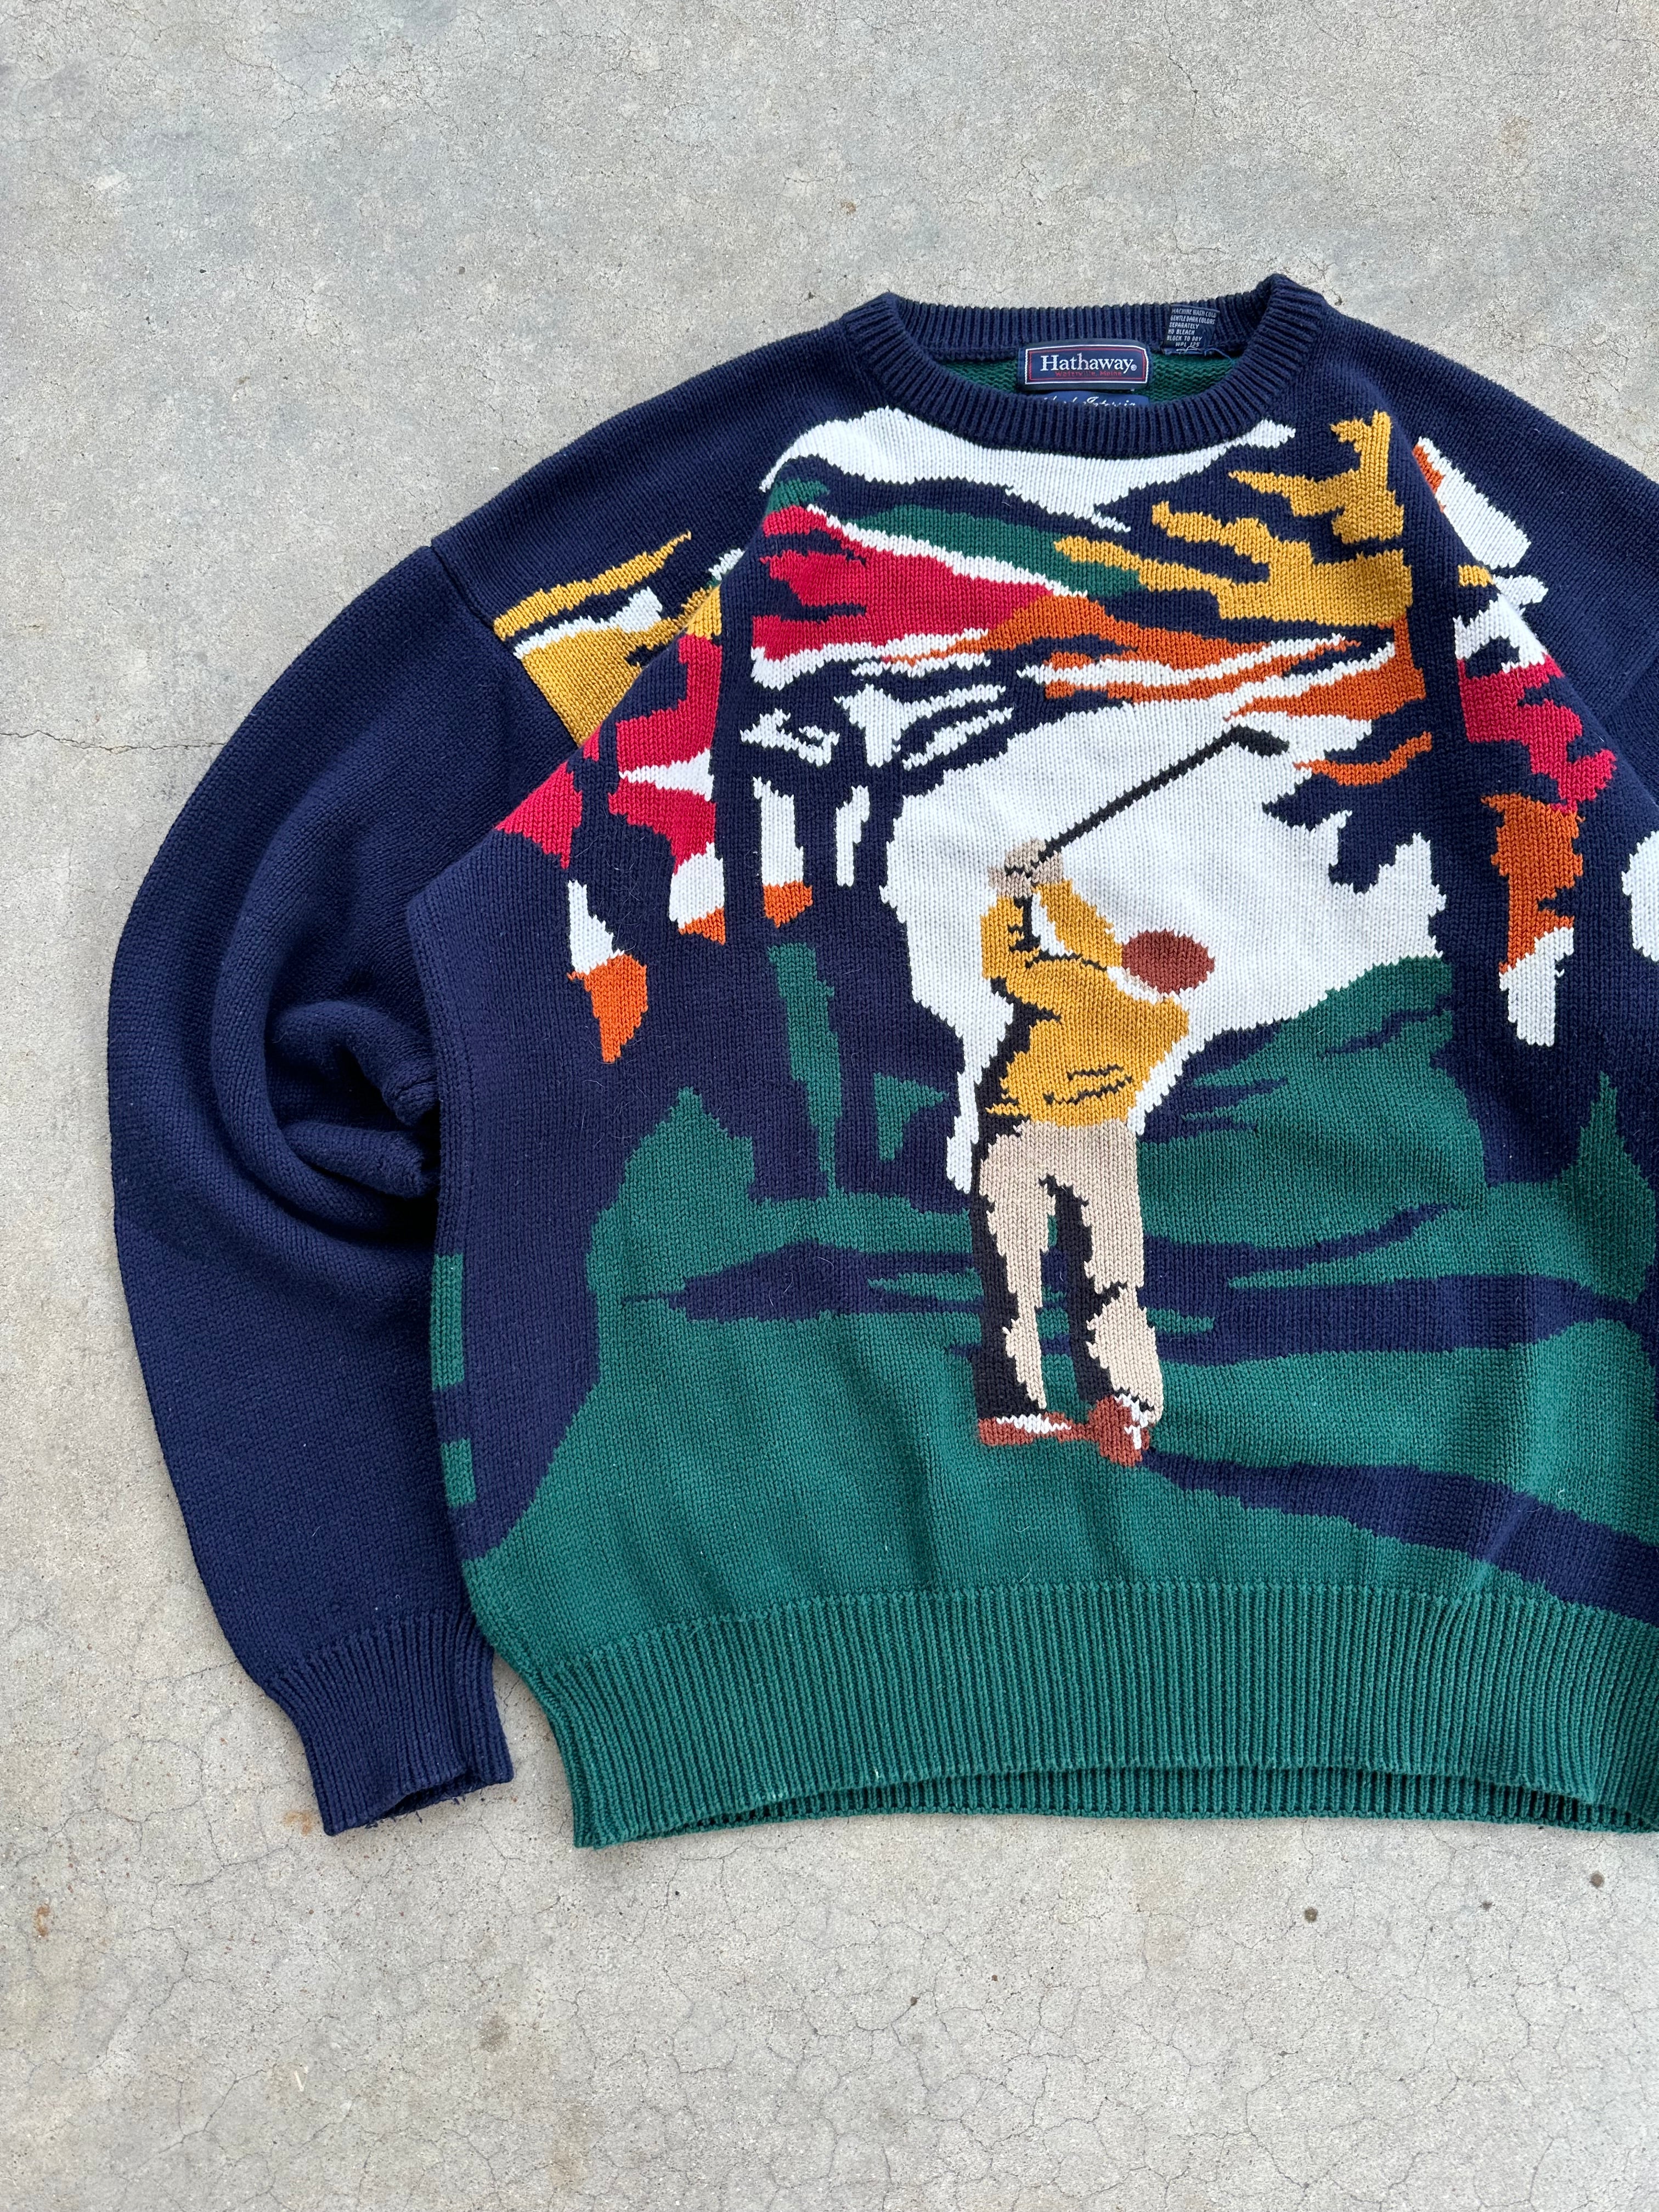 1990s Golf All Over Print Knitted Sweater (L)